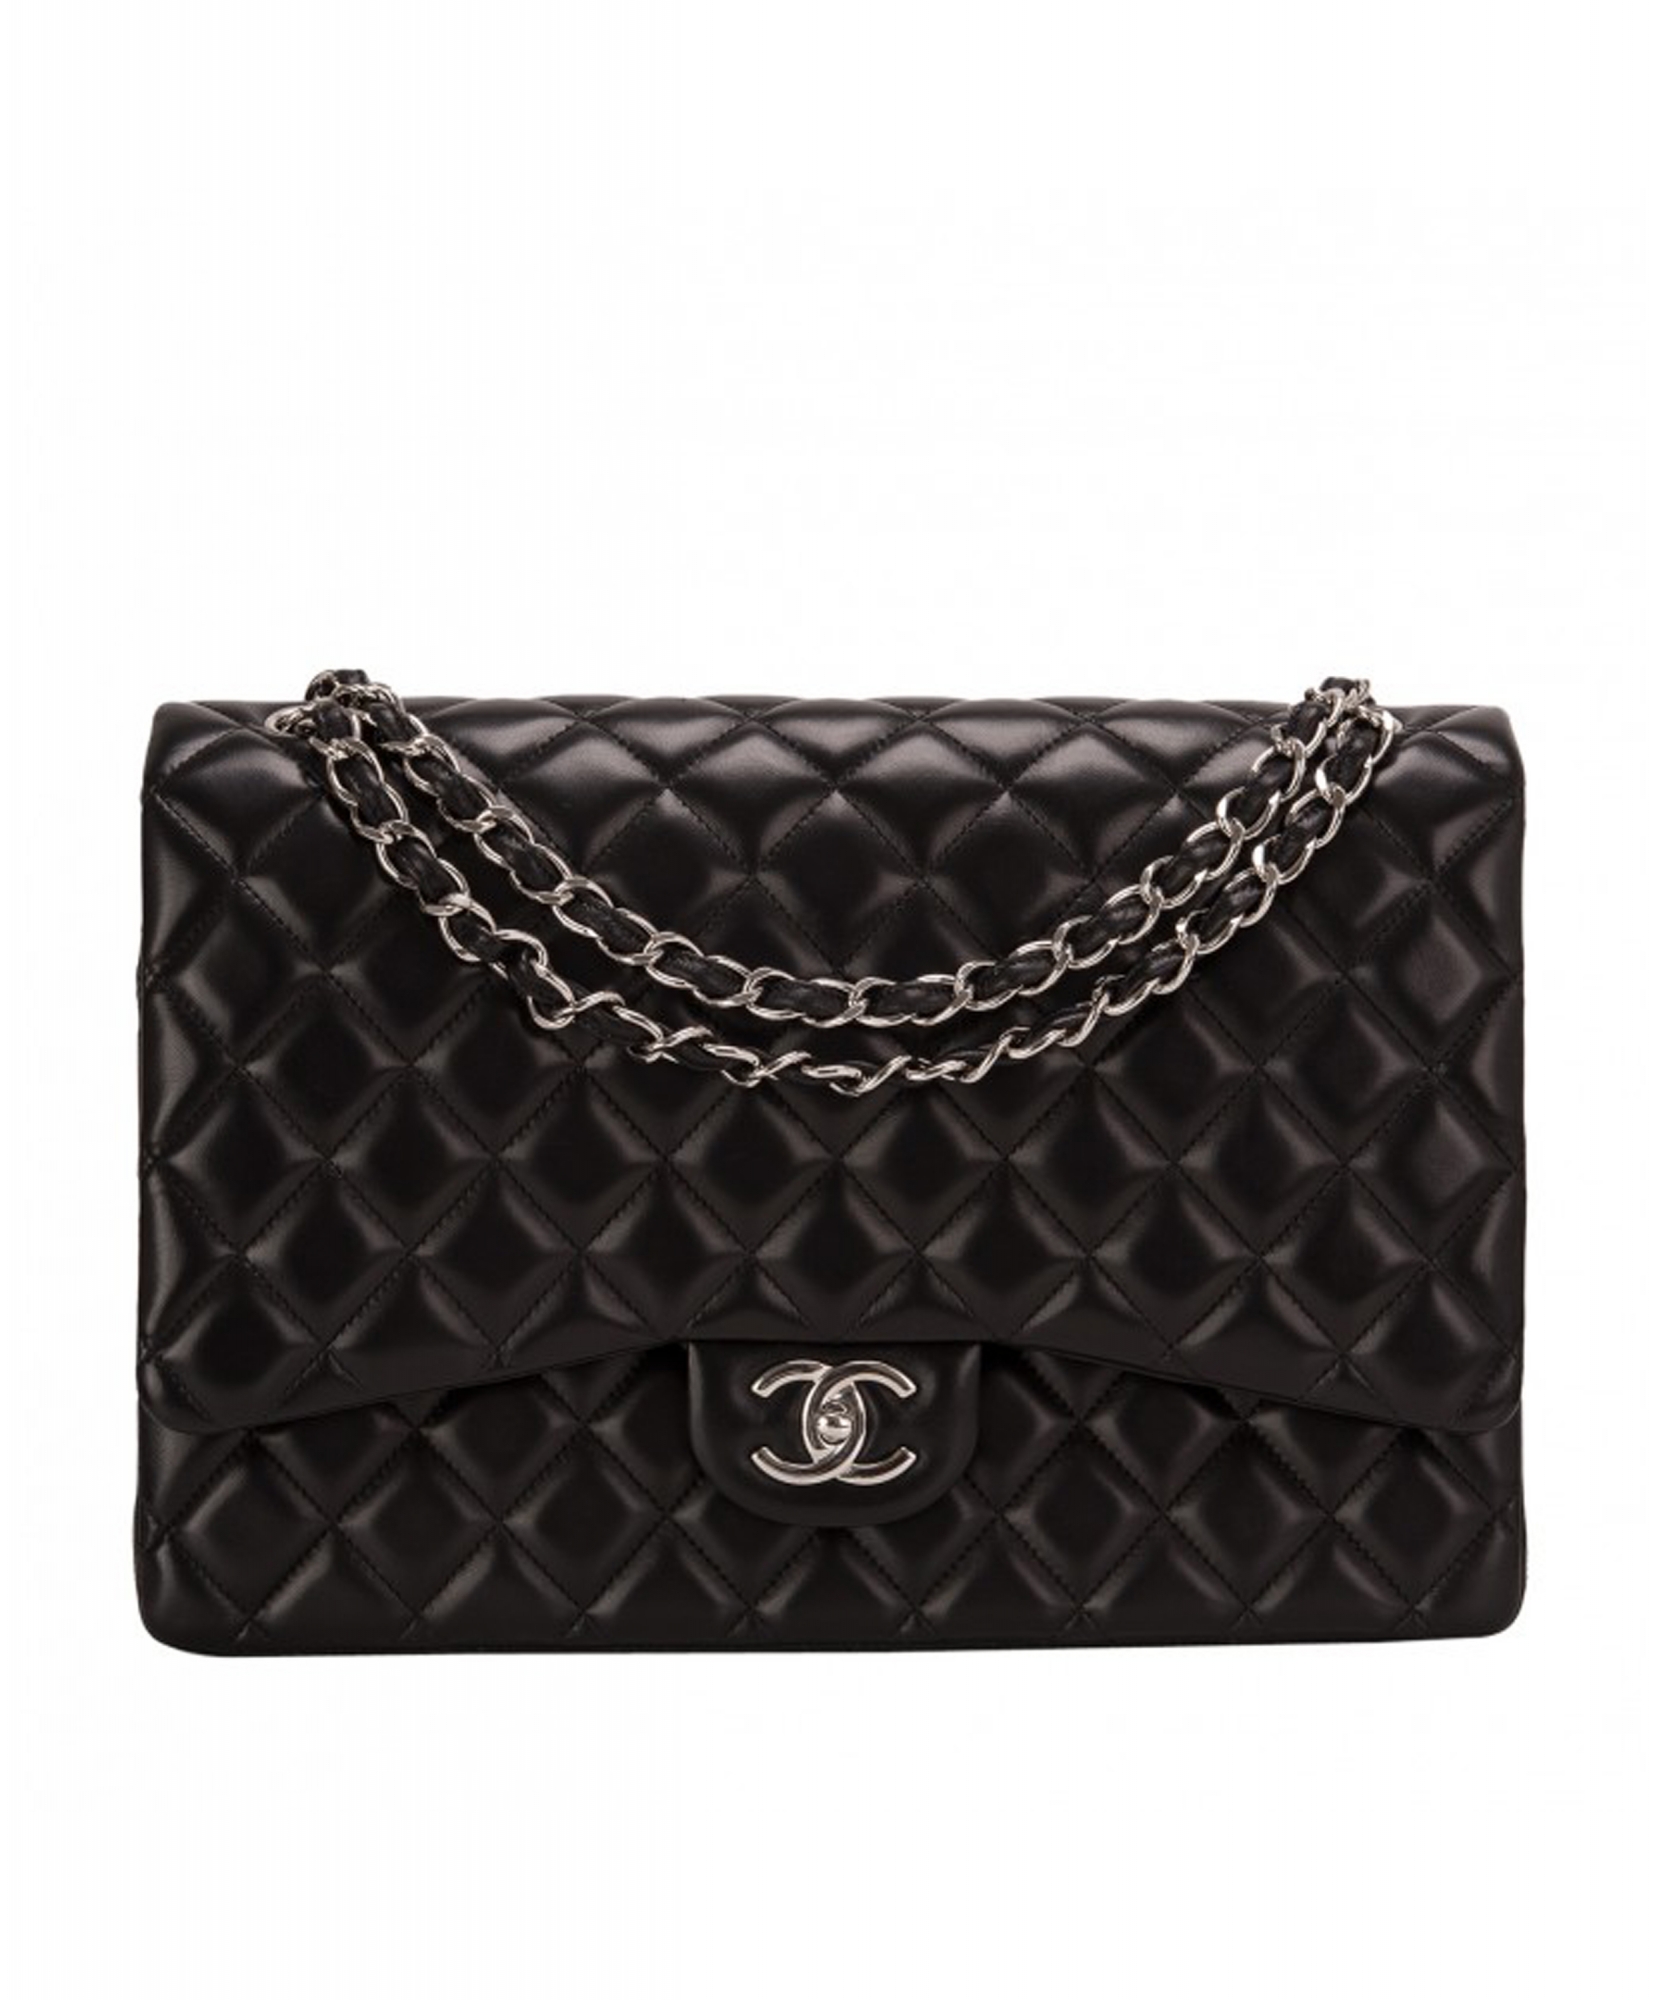 Chanel Black Quilted Lambskin Leather Classic Maxi Single Flap Bag - Chanel